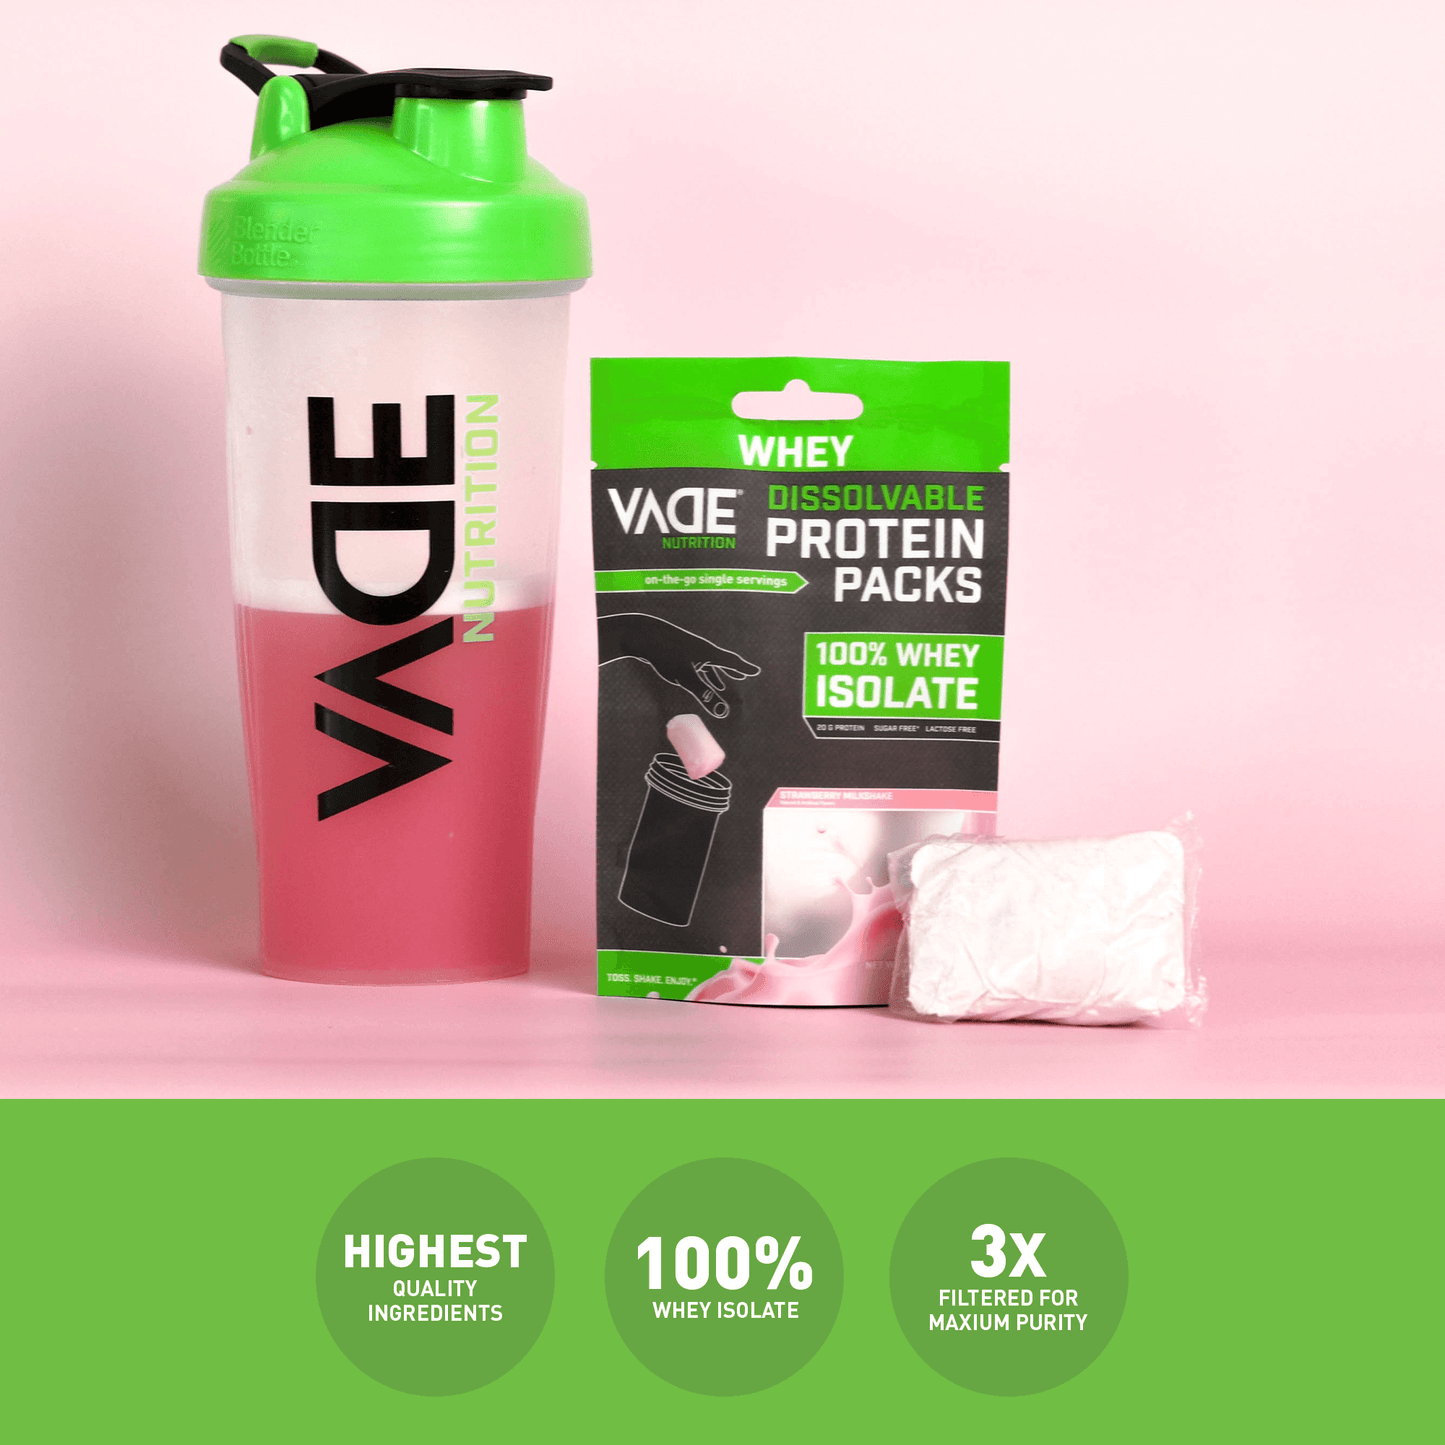 VADE Nutrition Dissolvable Protein Packs | Chocolate, Strawberry, Vanilla,  Cappuccino & Shaker Bottle Bundle, Whey Isolate Protein Powder (8 Pack)